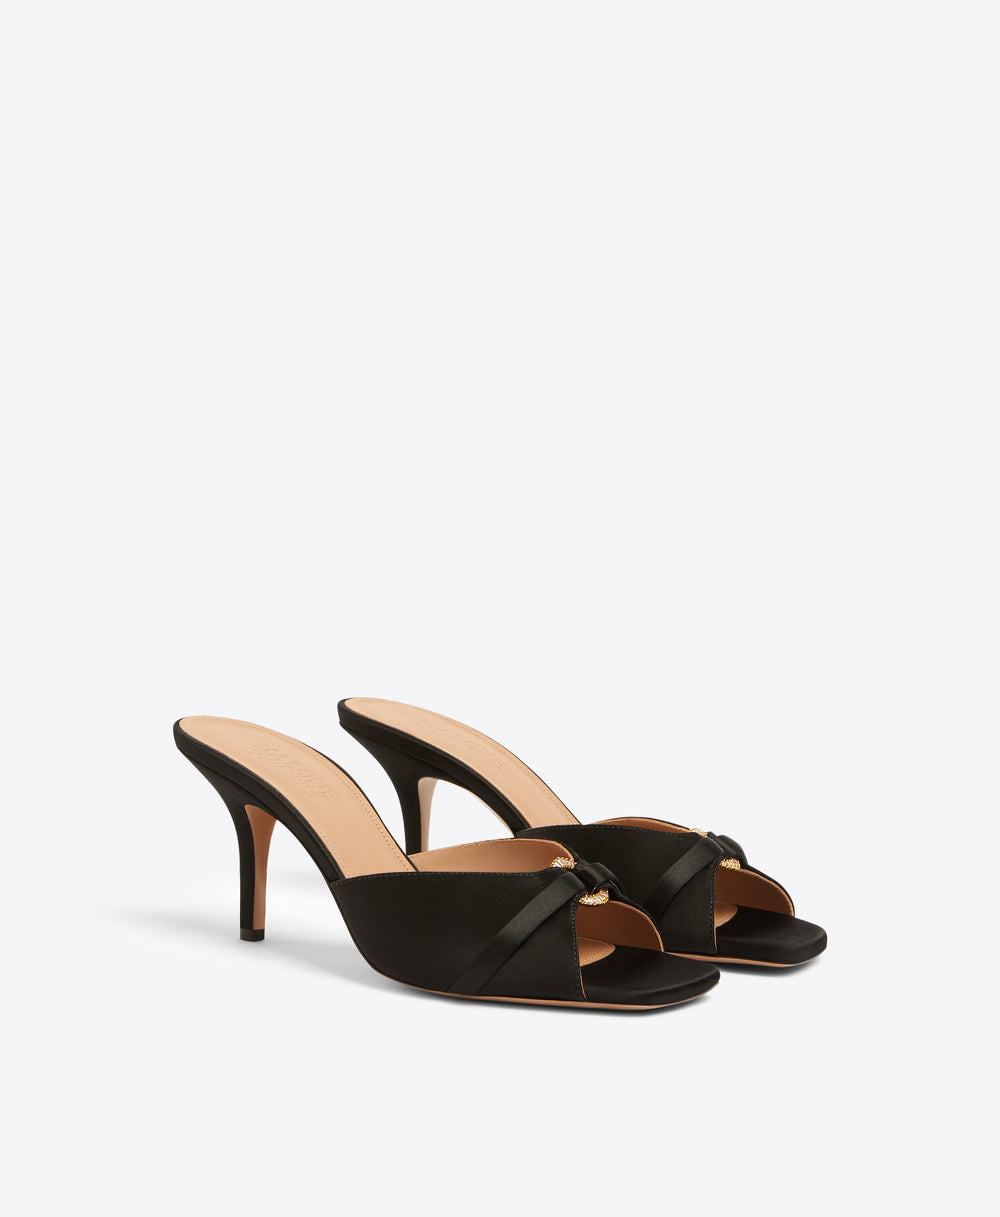 Patricia 70 Black Satin Heeled Sandals Malone Souliers